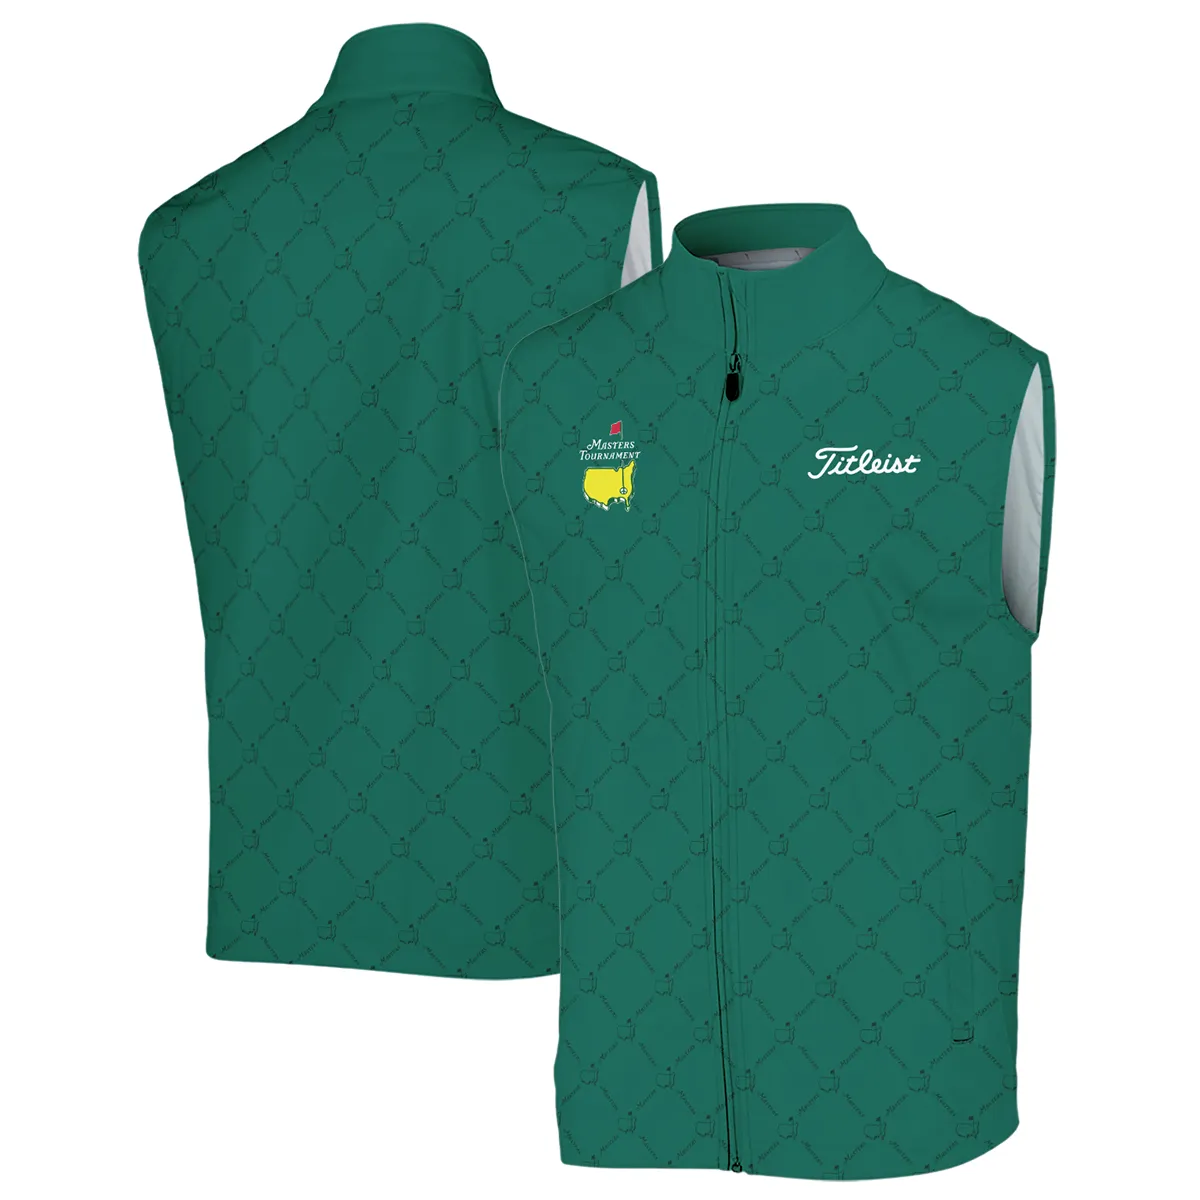 Golf Sport Pattern Color Green Mix Black Masters Tournament Titleist Sleeveless Jacket Style Classic